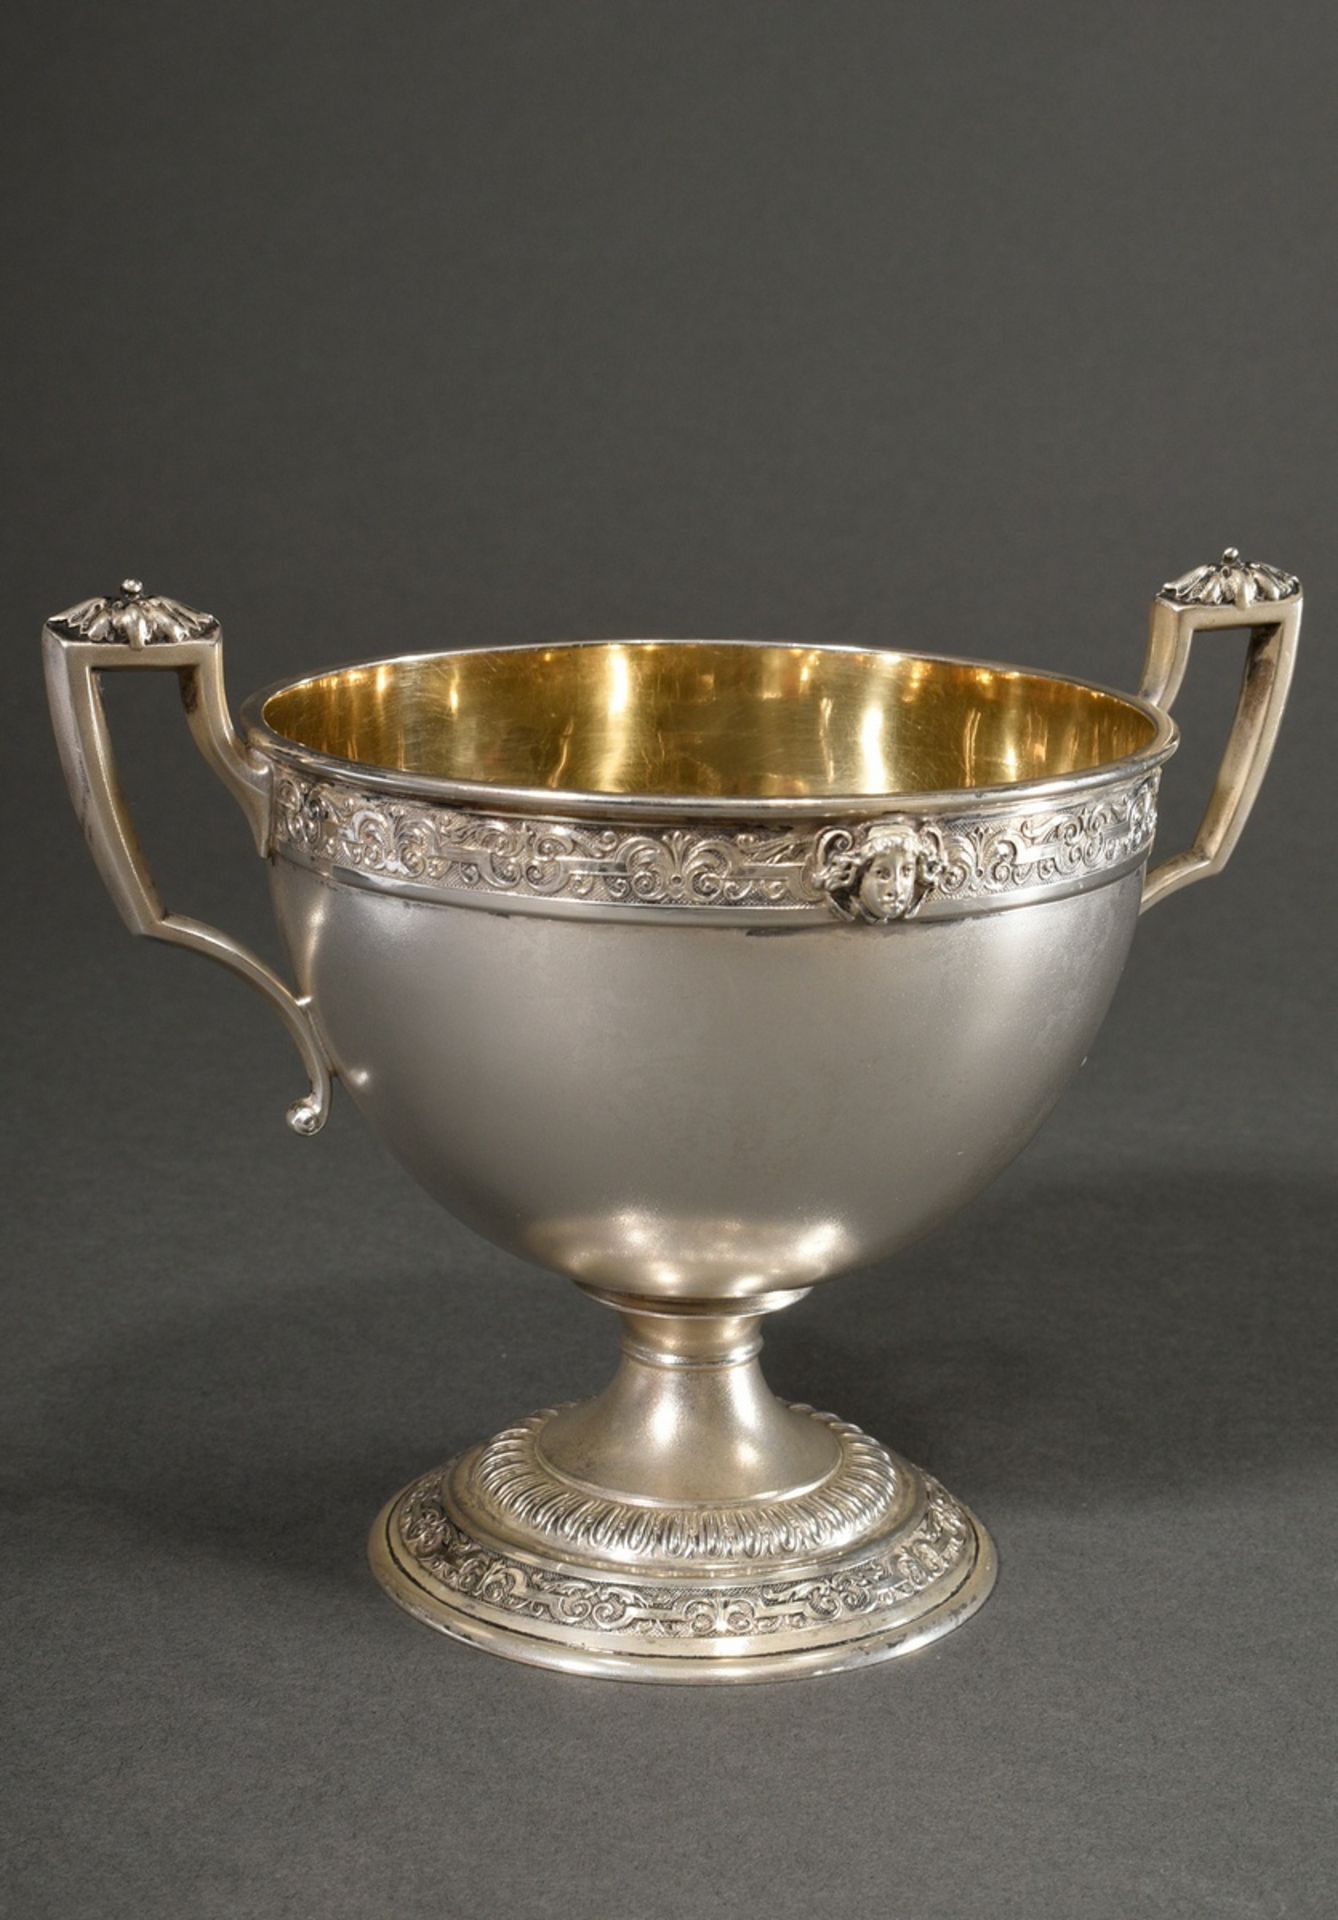 Renaissance-style goblet bowl with raised handles on both sides on a round foot, all-round ornament - Image 2 of 6